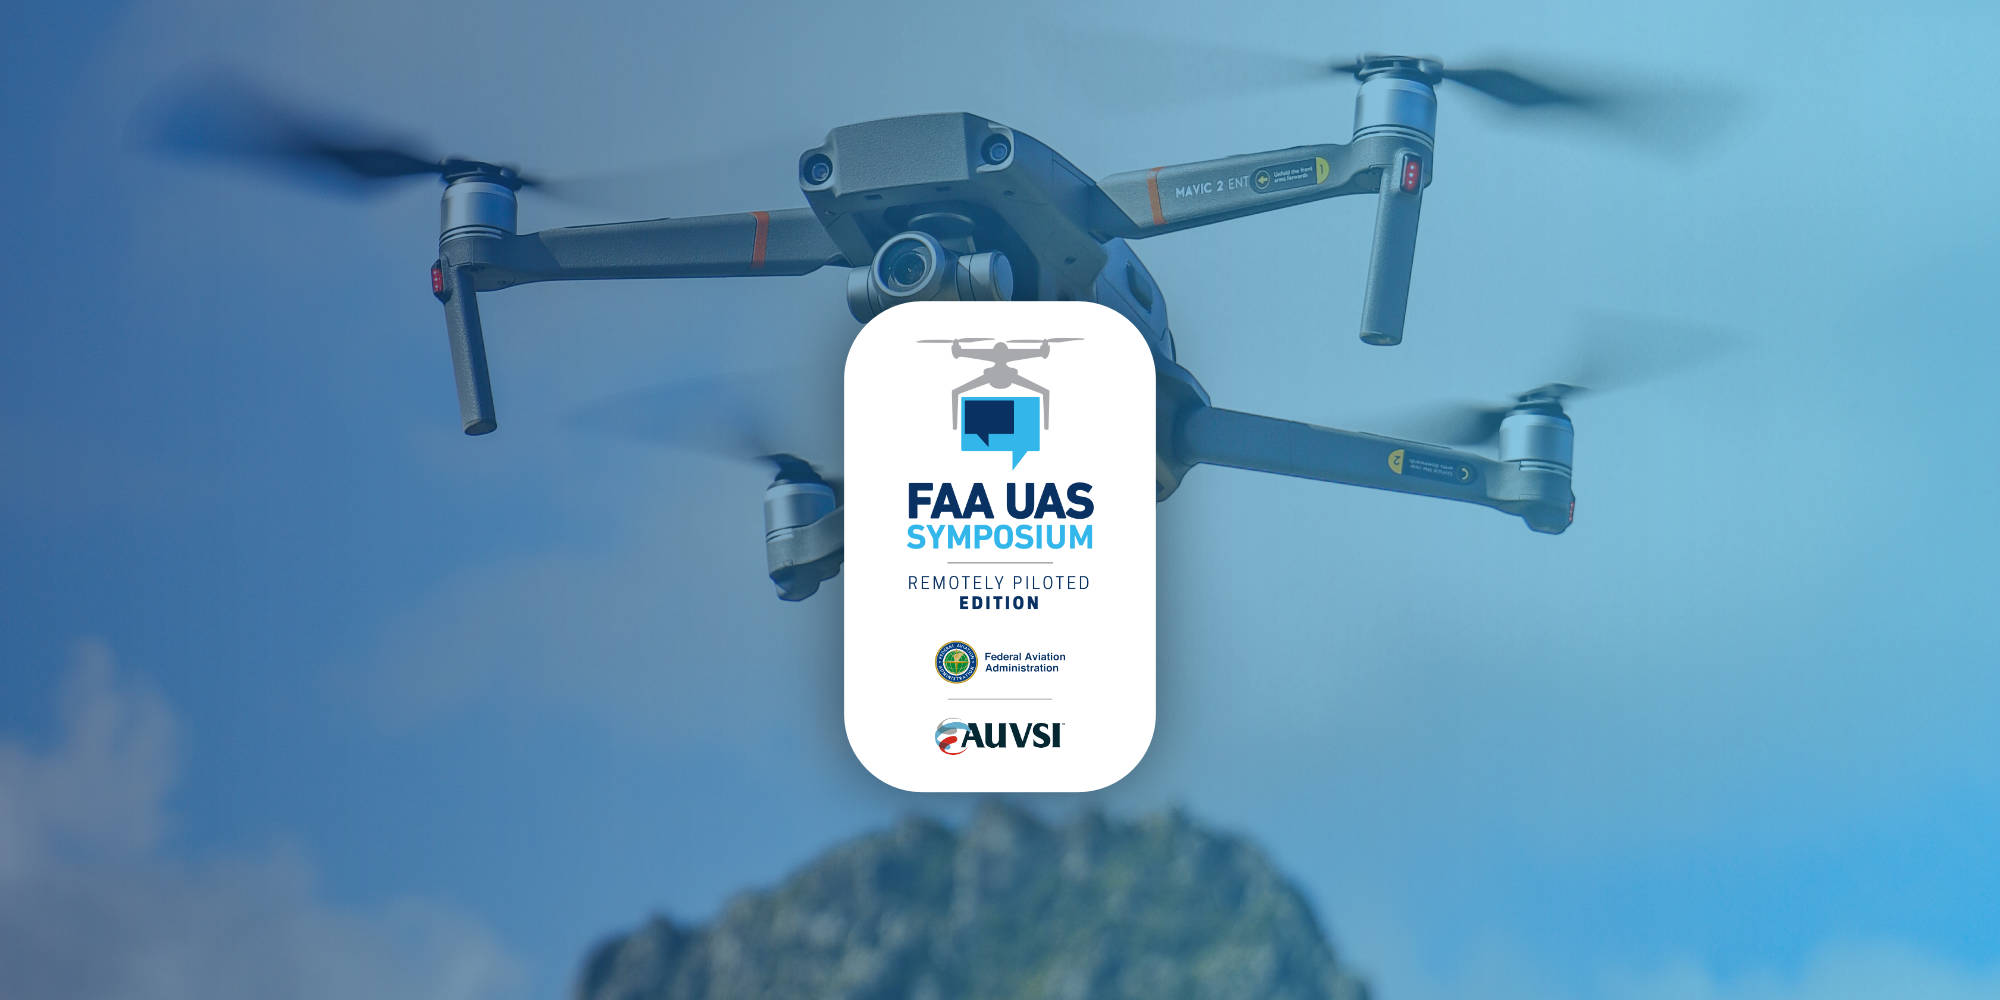 The FAA's 2020 UAS Symposium is back, online only though